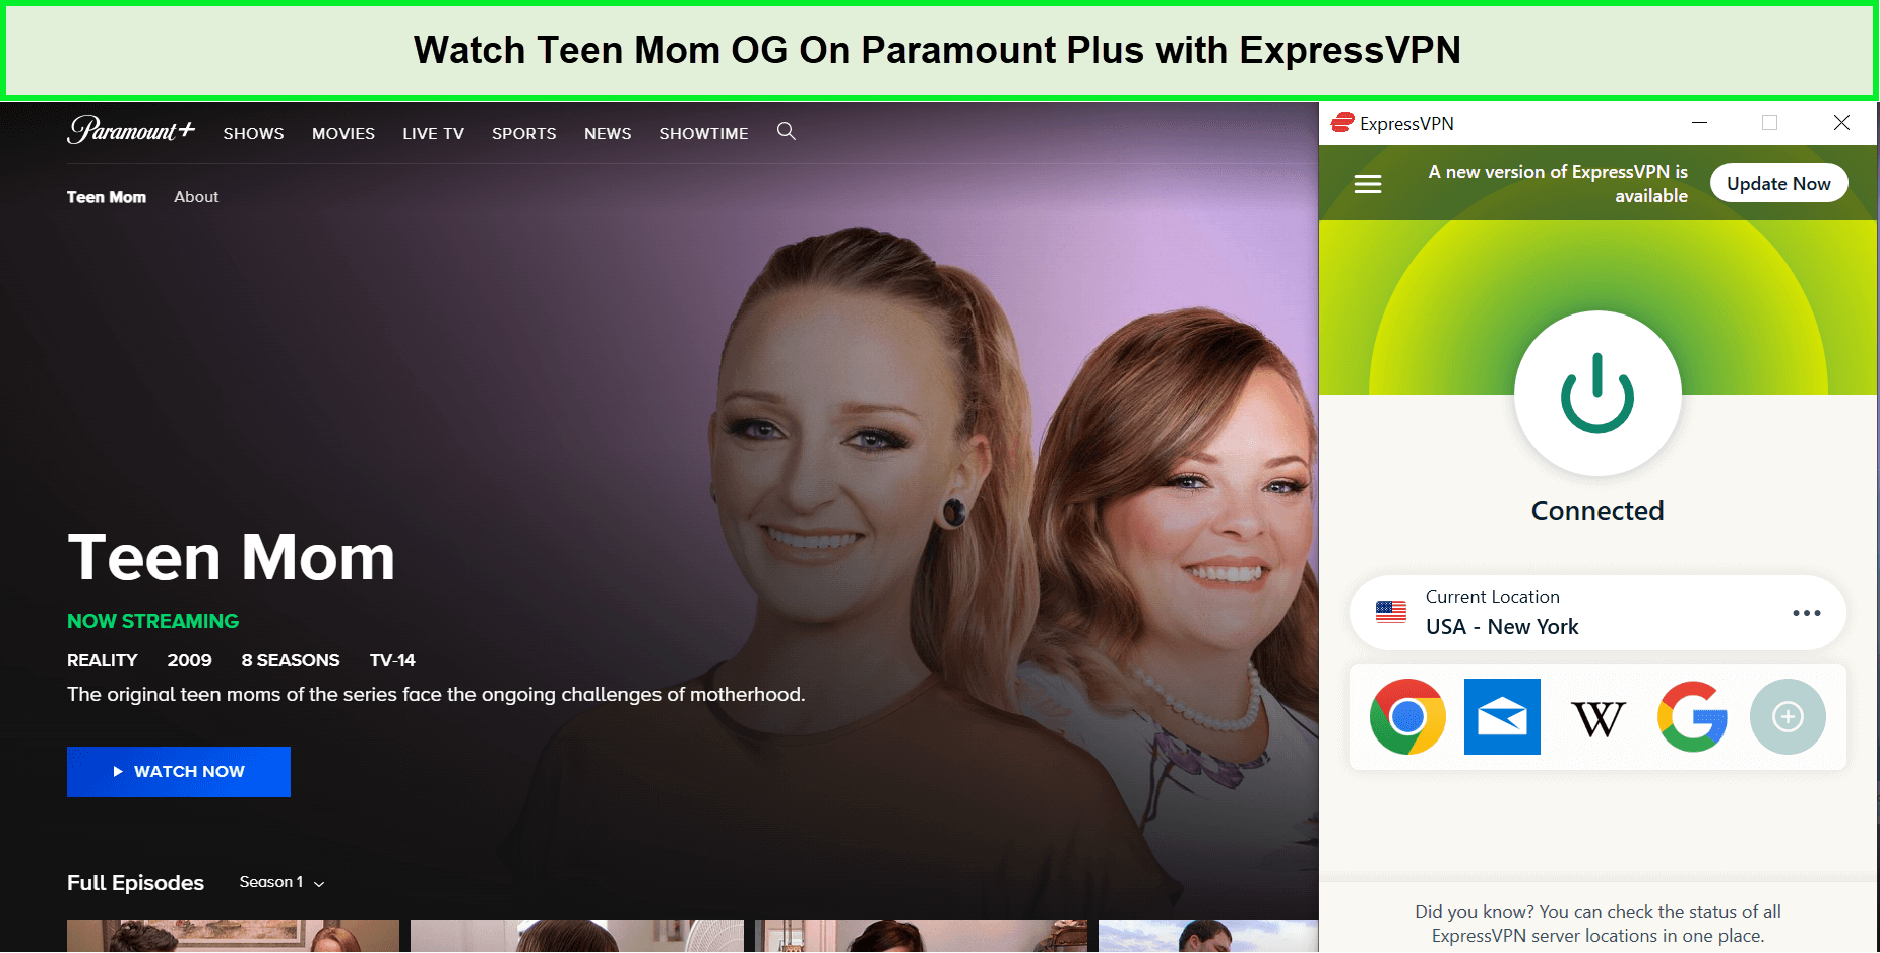 Watch-Teen-Mom-OG-Season-9-in-Italy-On-Paramount-Plus-with-ExpressVPN